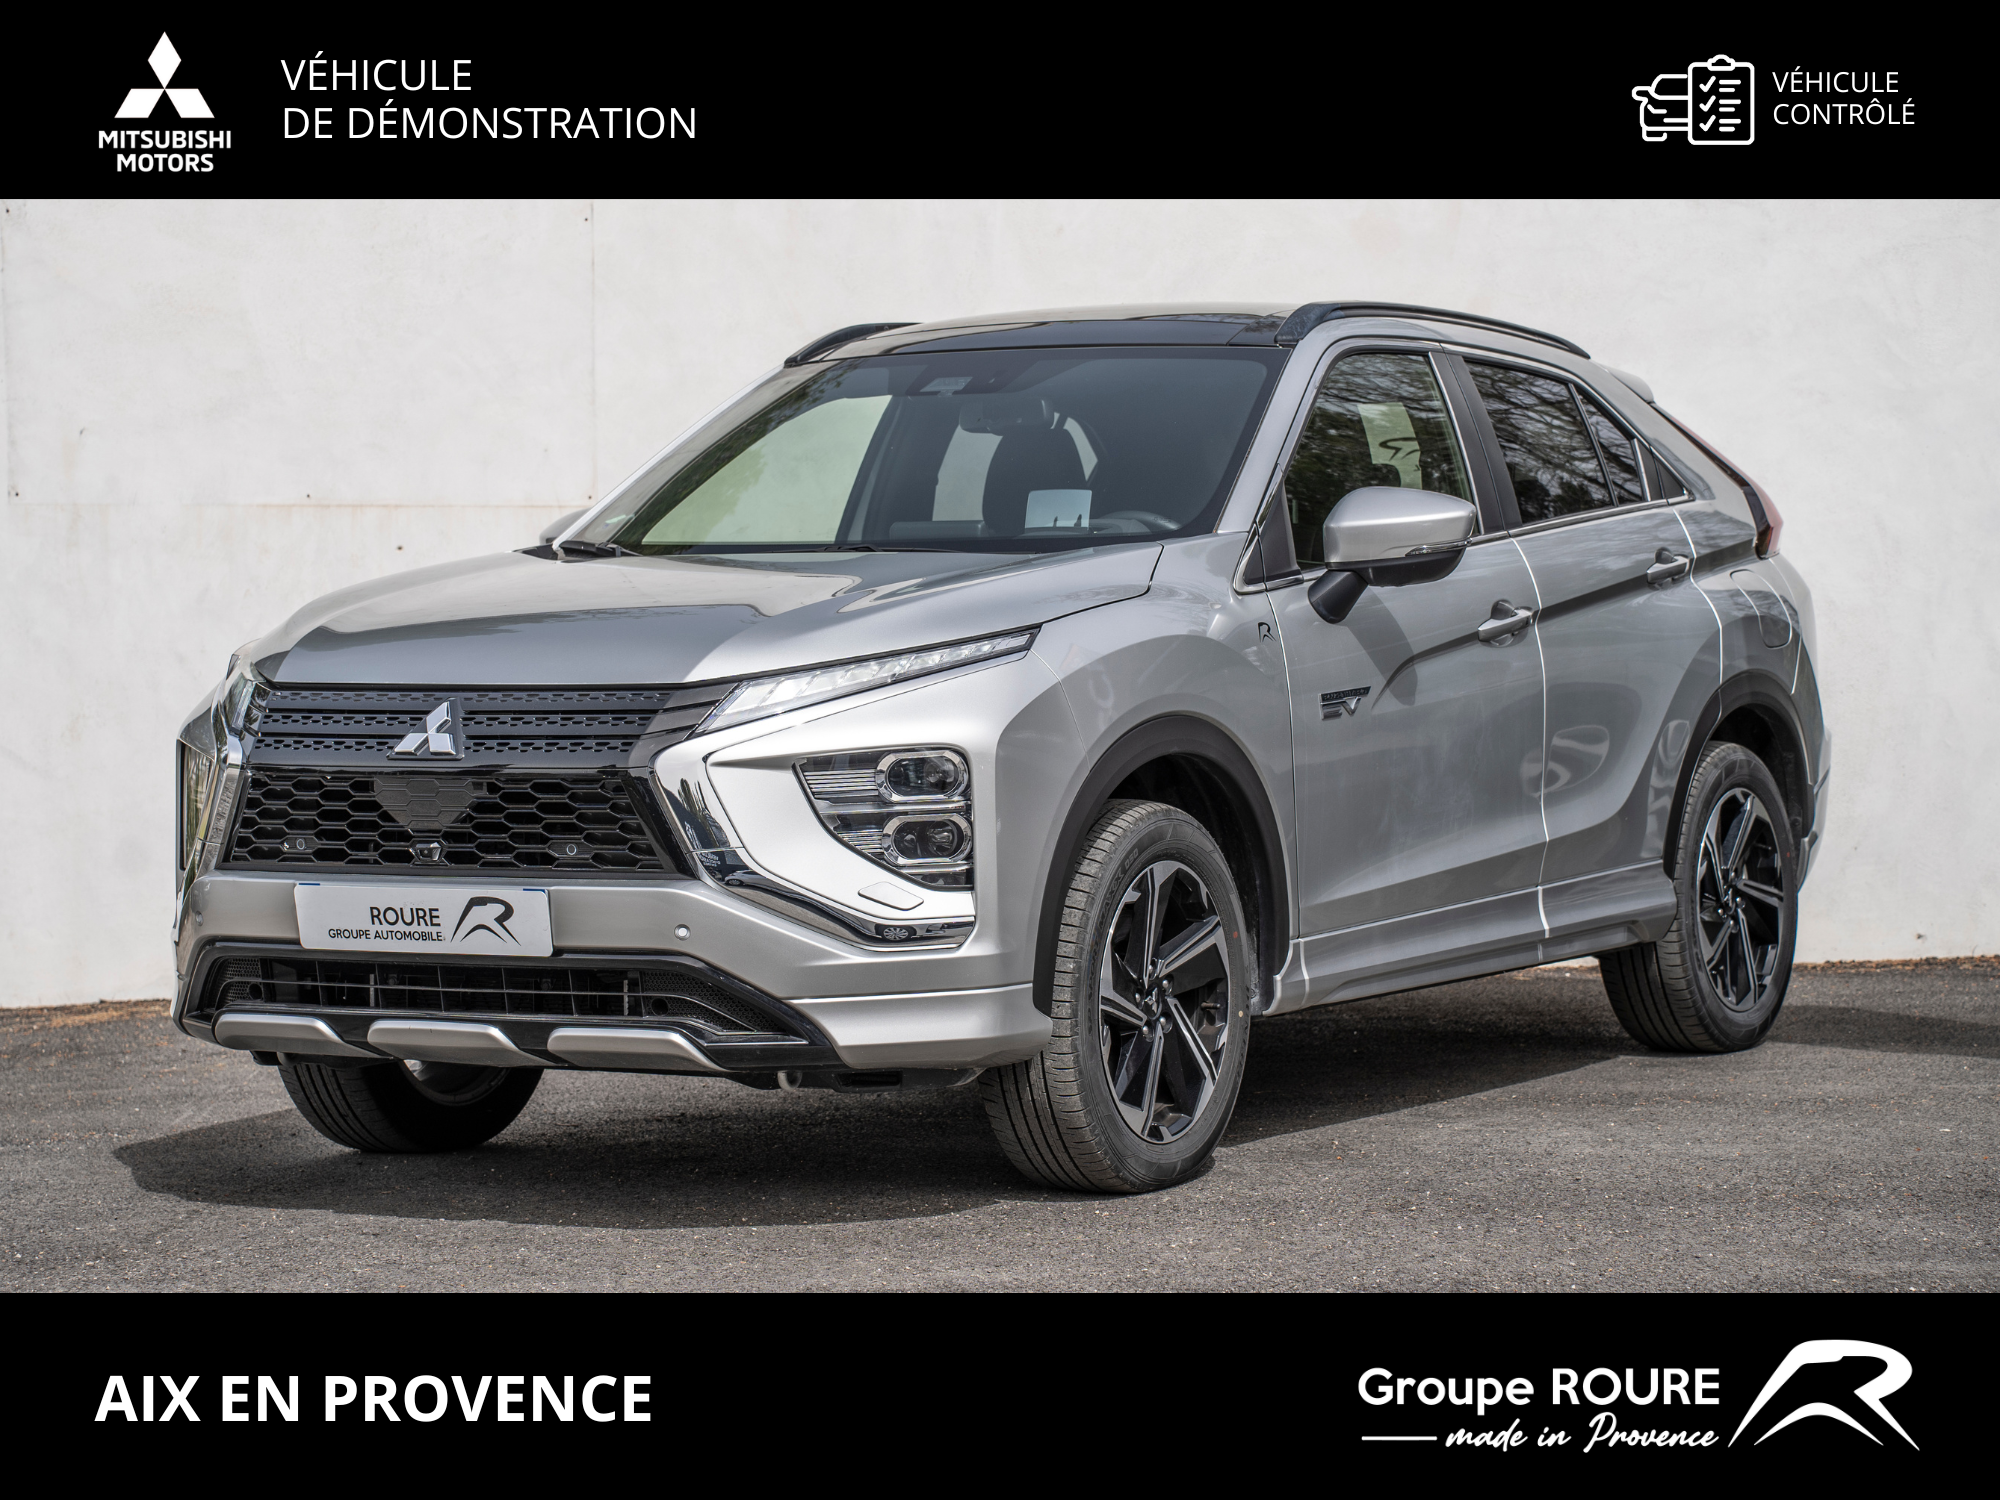 MITSUBISHI-ECLIPSE CROSS-Eclipse Cross 2.4 MIVEC PHEV Twin Motor 4WD-Instyle-36990-5800-roure-automobiles